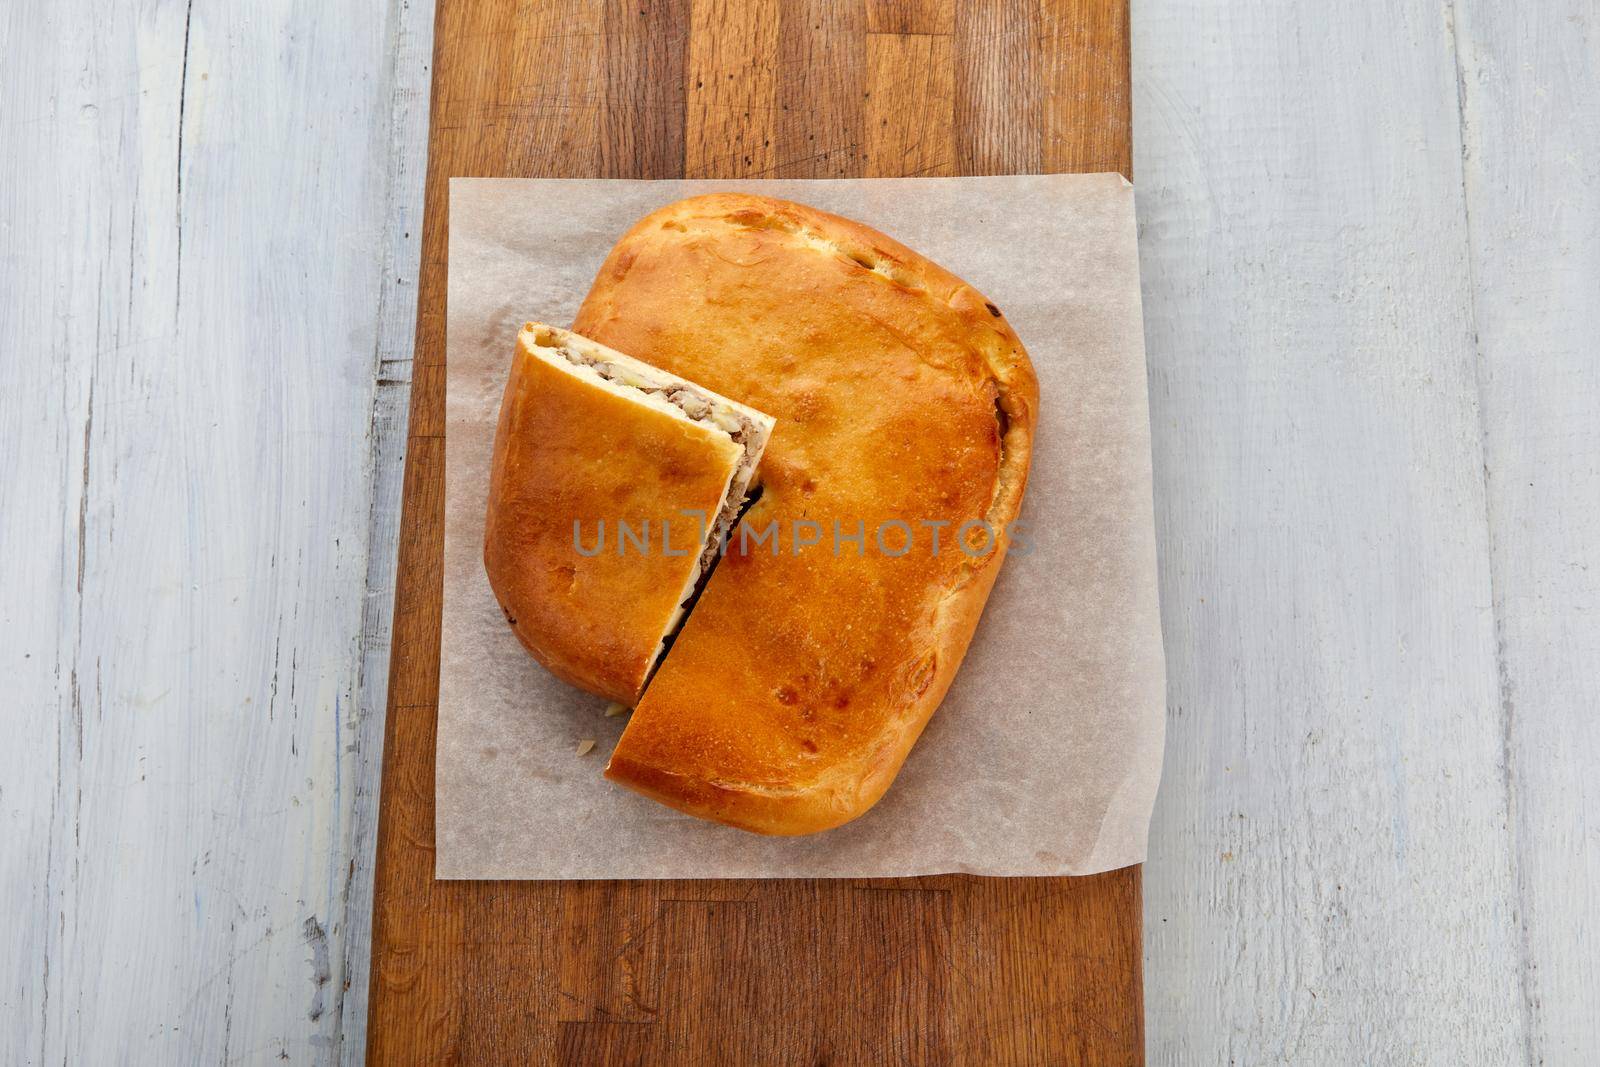 Meat pie on cutting board white wood background by Demkat